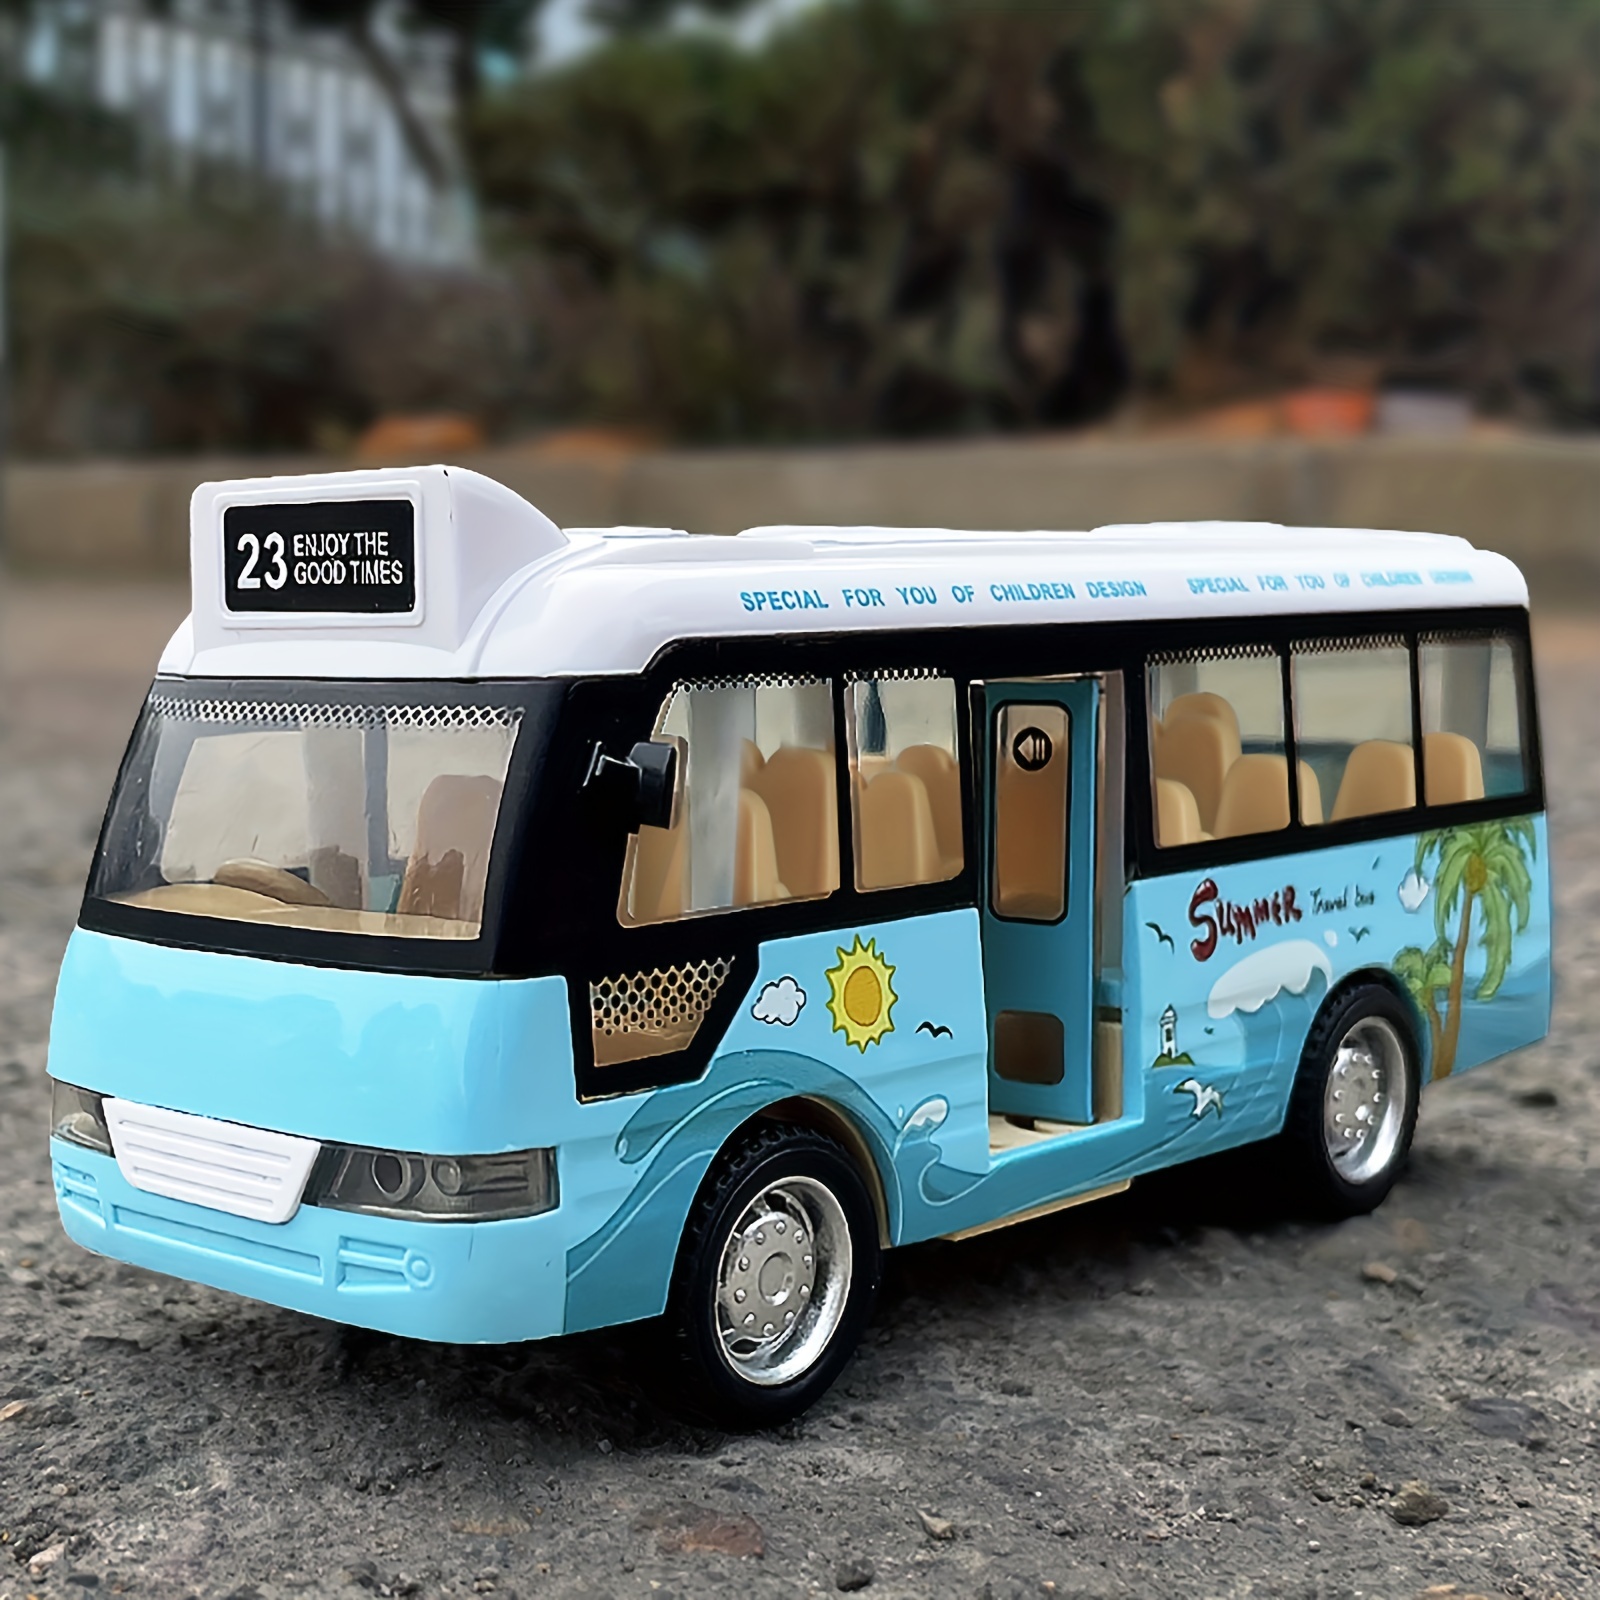 

City Bus Toys Cars, Die-cast Metal Airport Cars For Boy 3-8 Years Old, Pull Back Blue Play Vehicle With Sound And Light Up For Kids Girls Gift Christmas, Halloween, Thanksgiving Gift